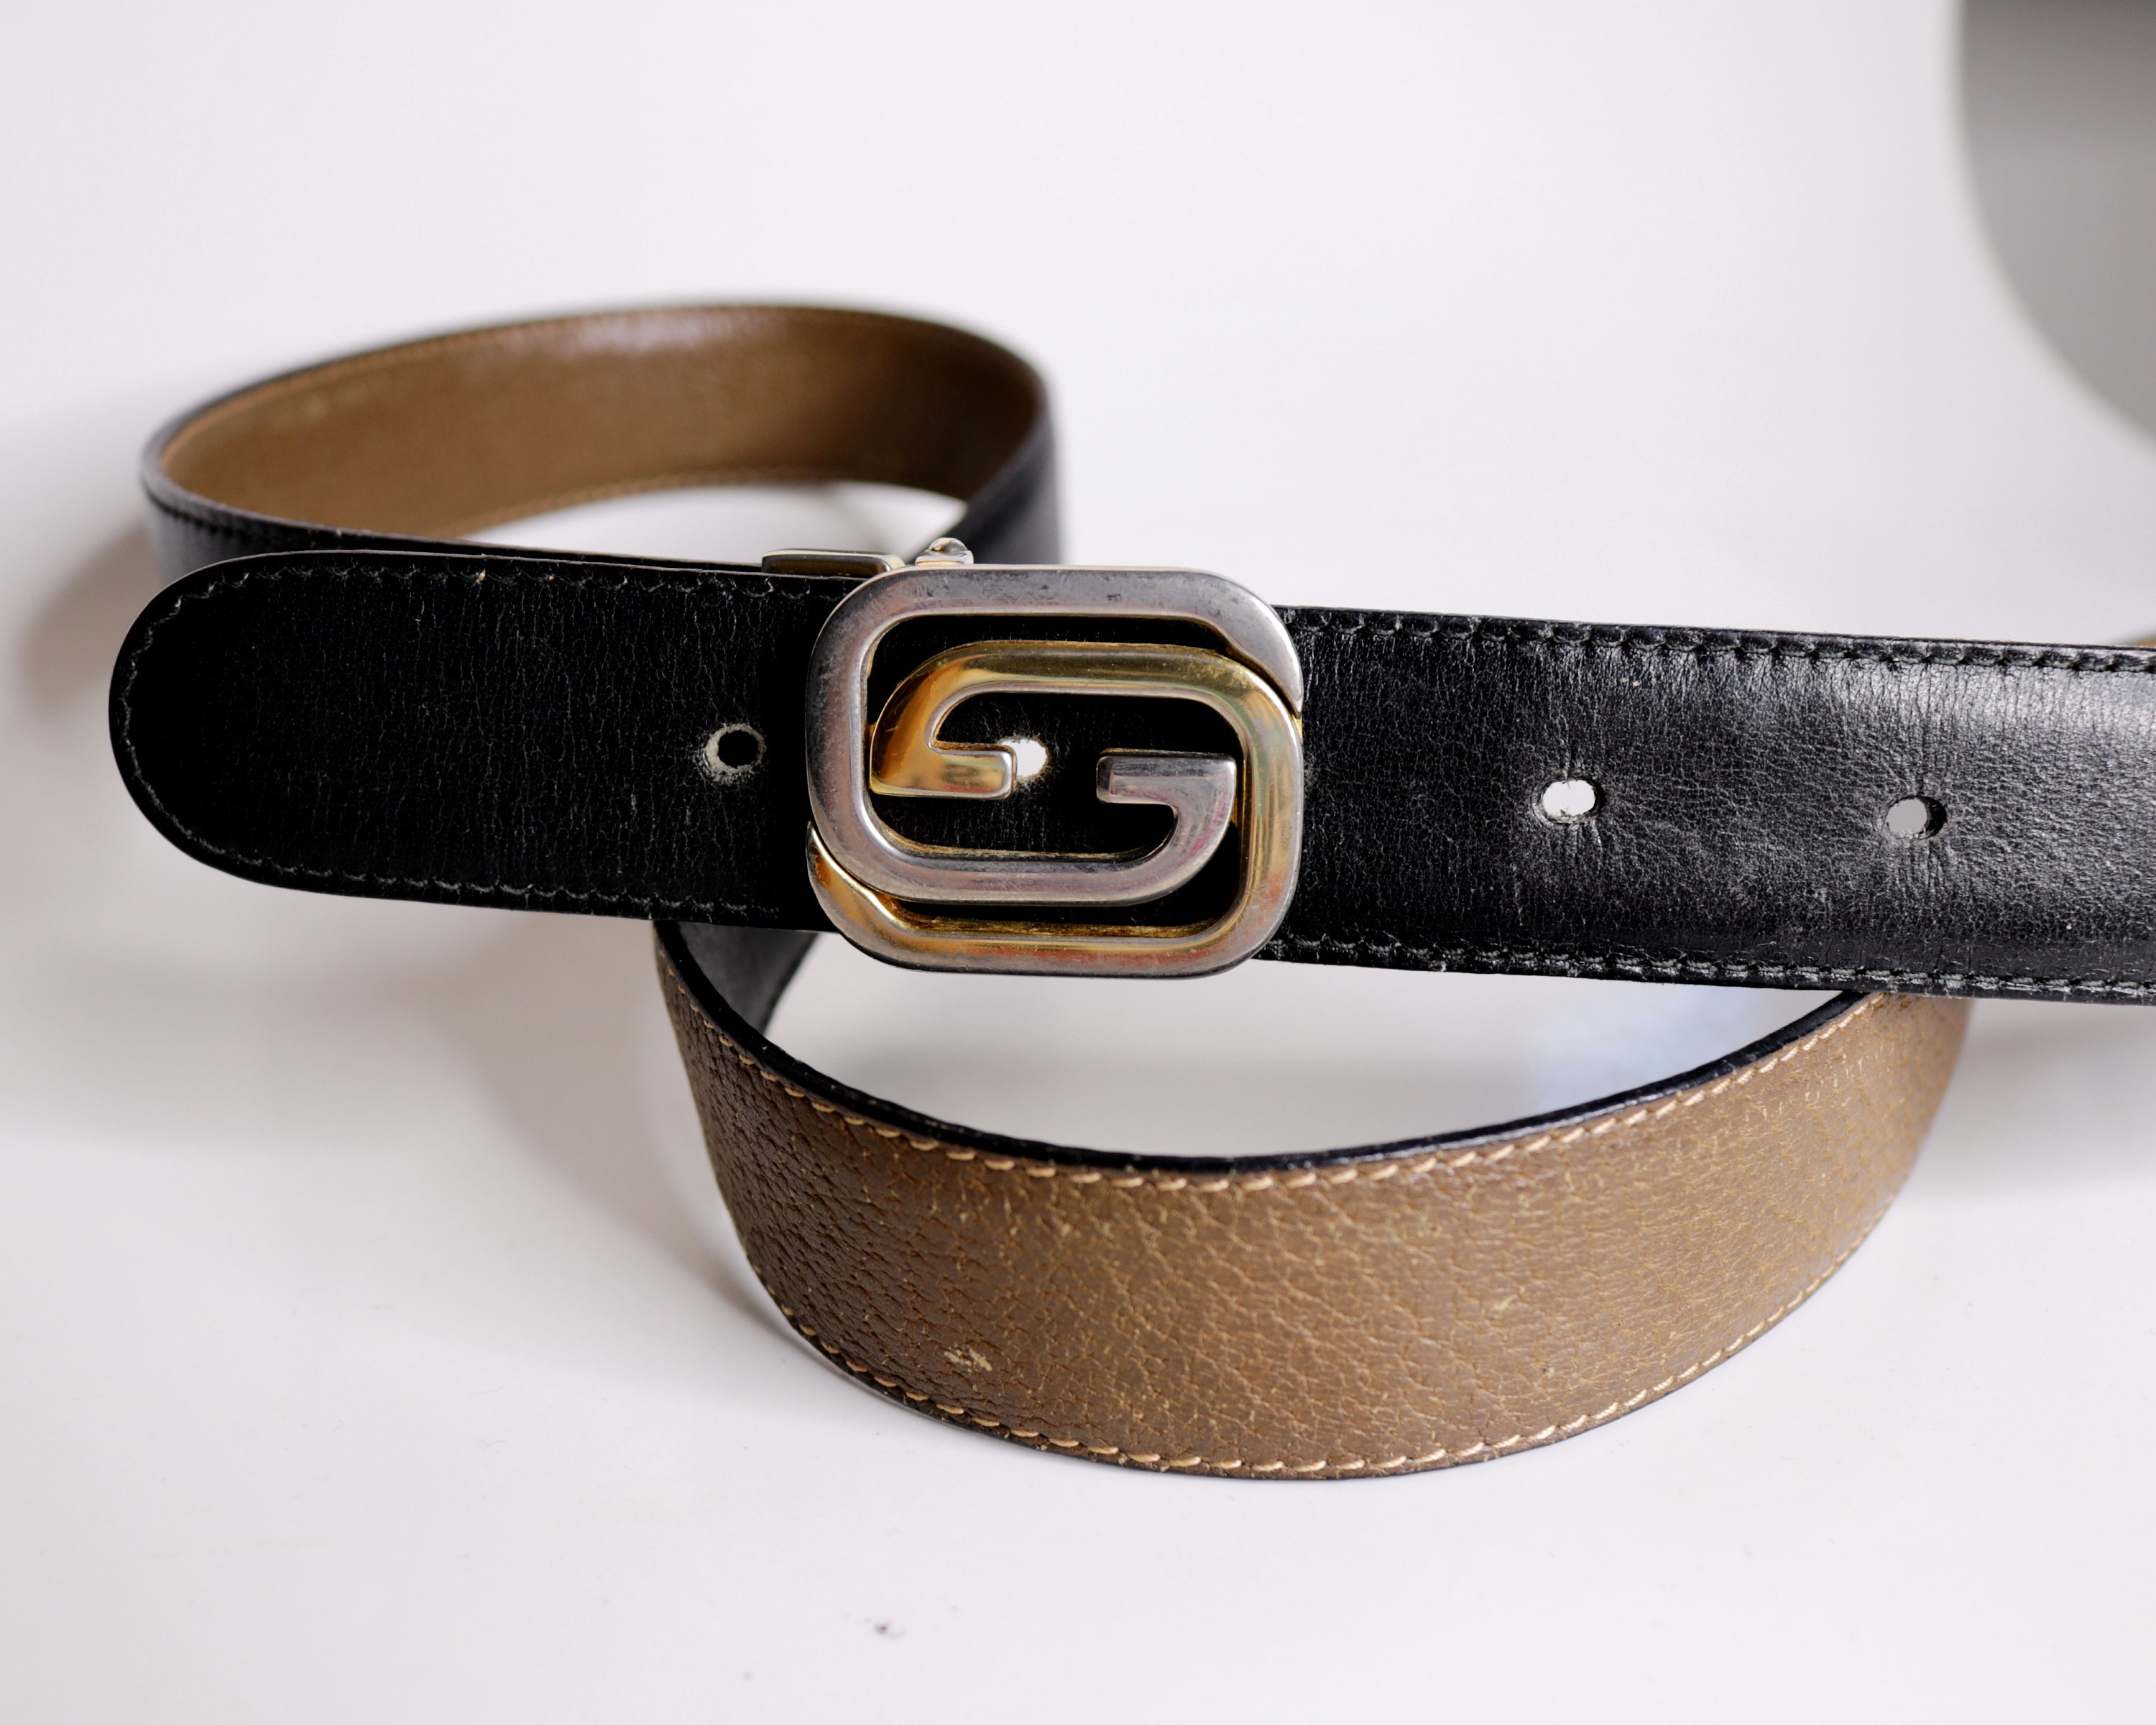 Vintage Gucci GG Buckle With Red & Green Skinny Belt Used 